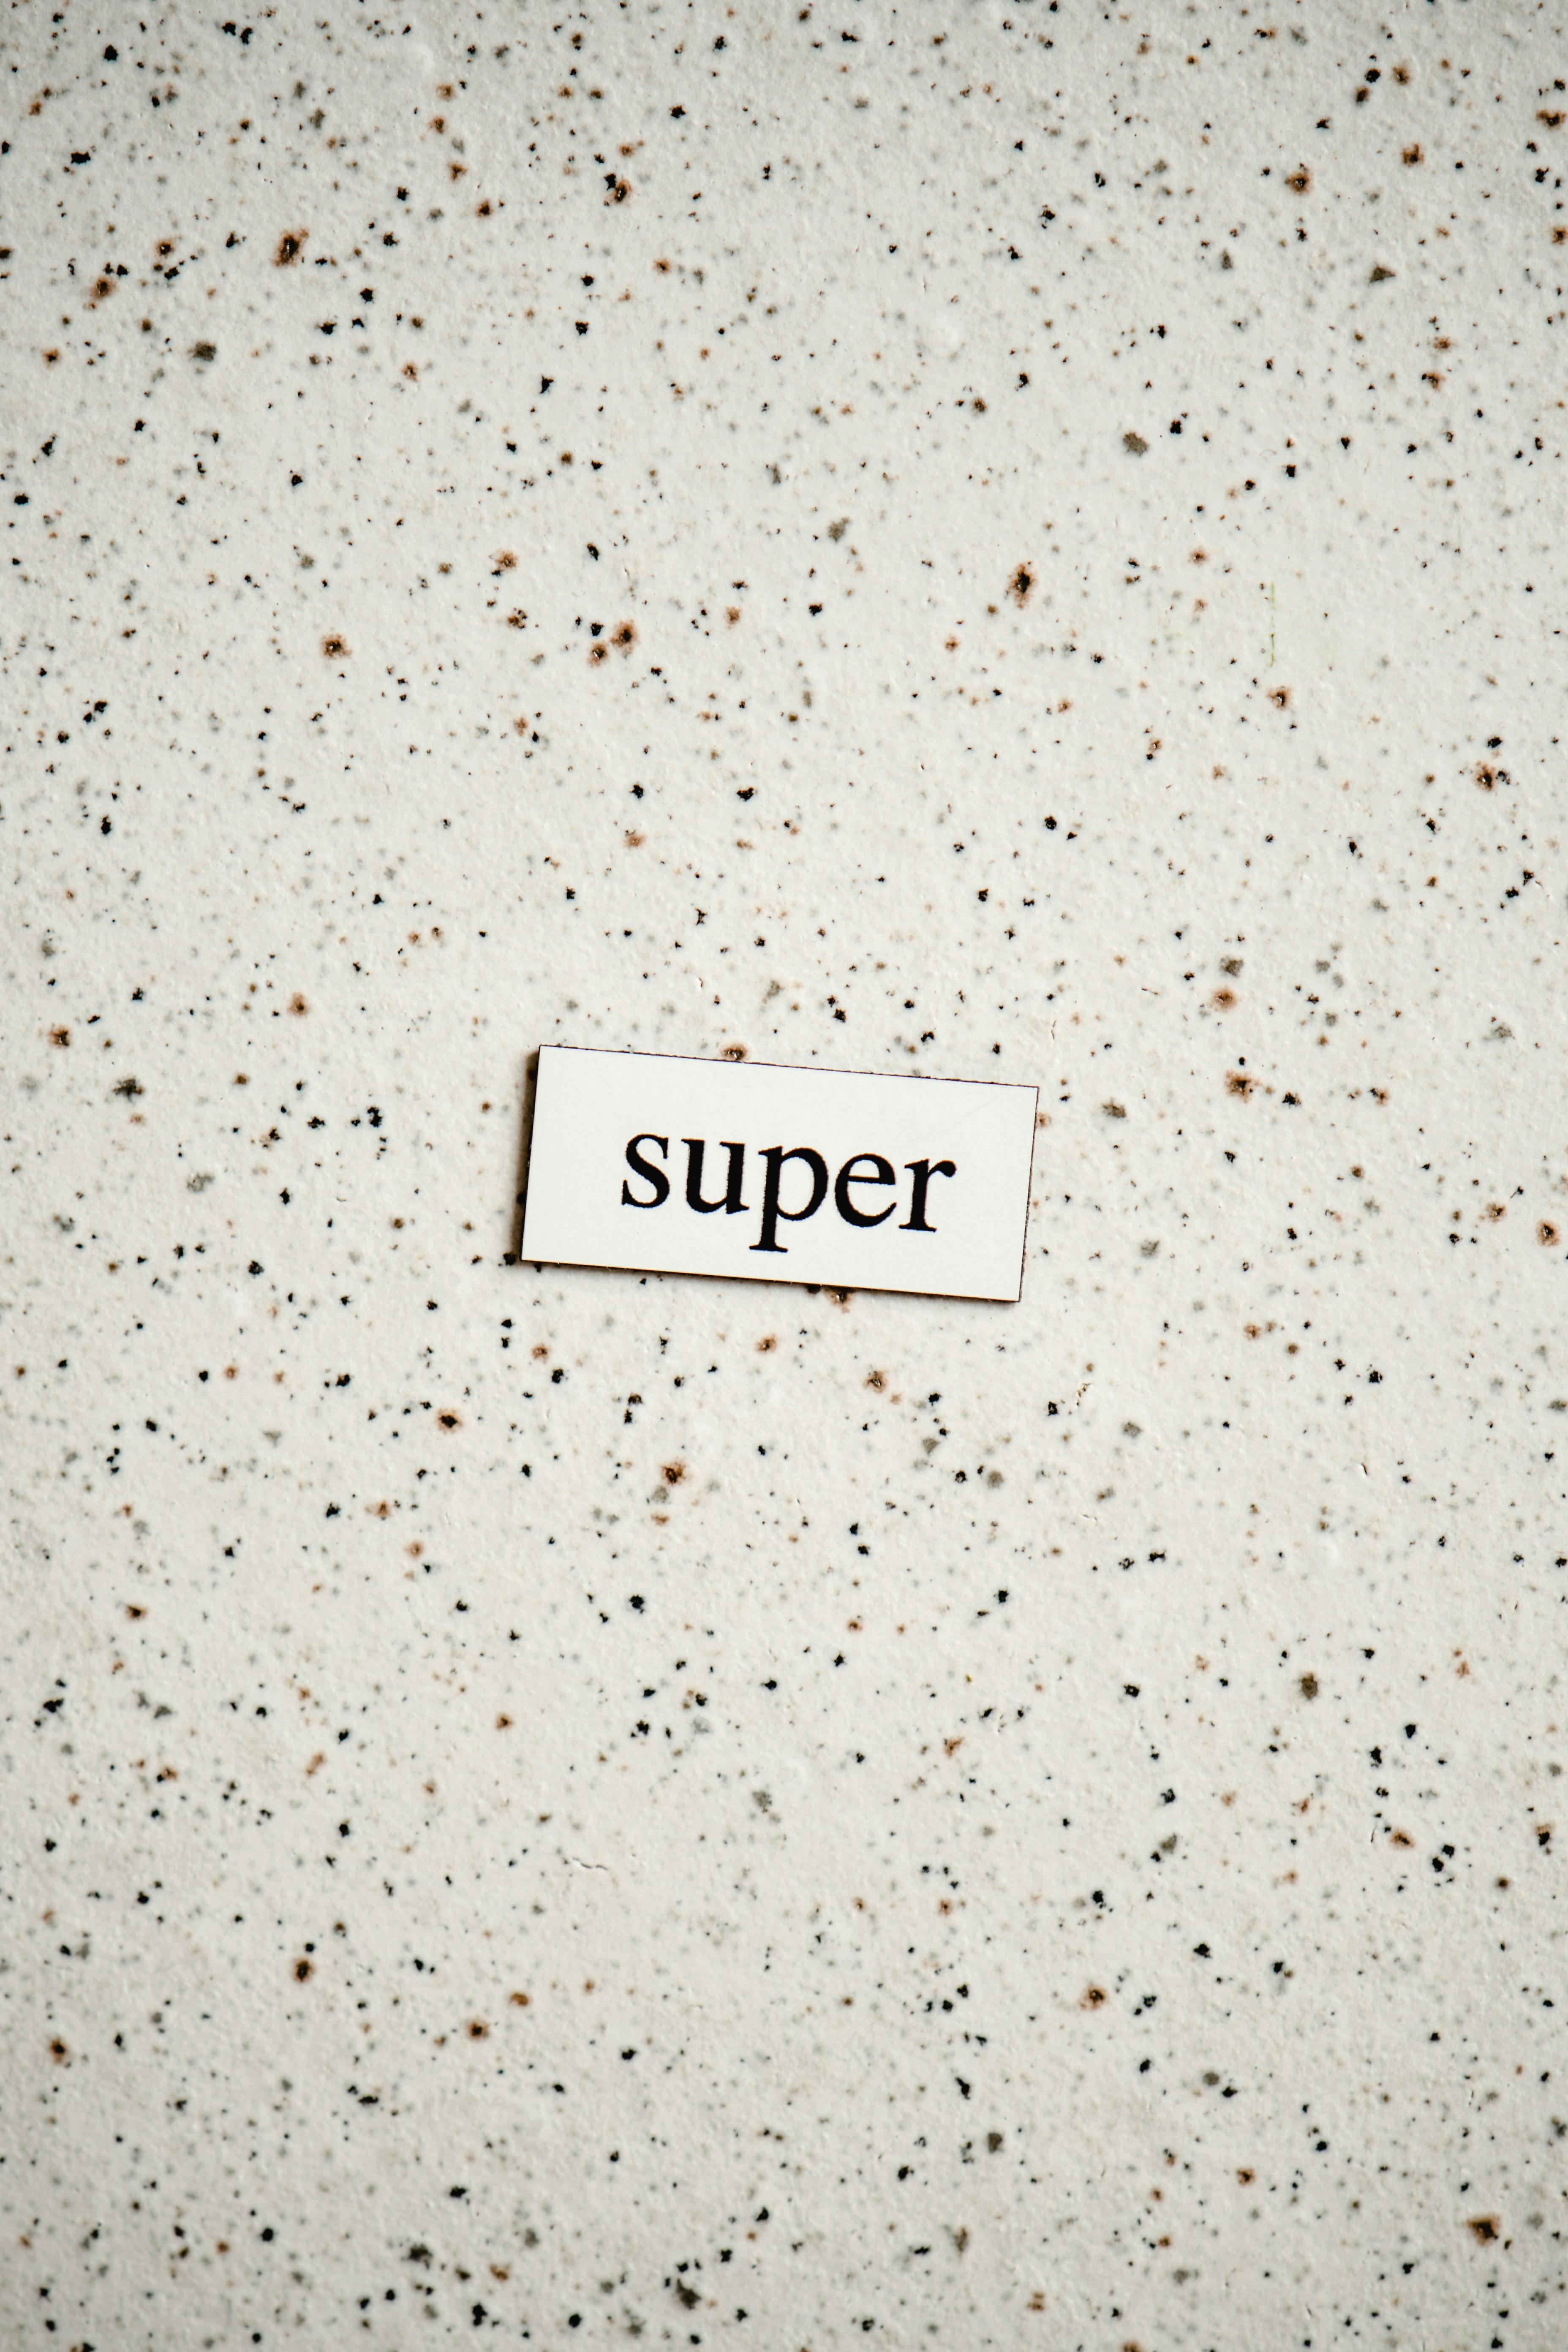 the word super cutout on a granite surface